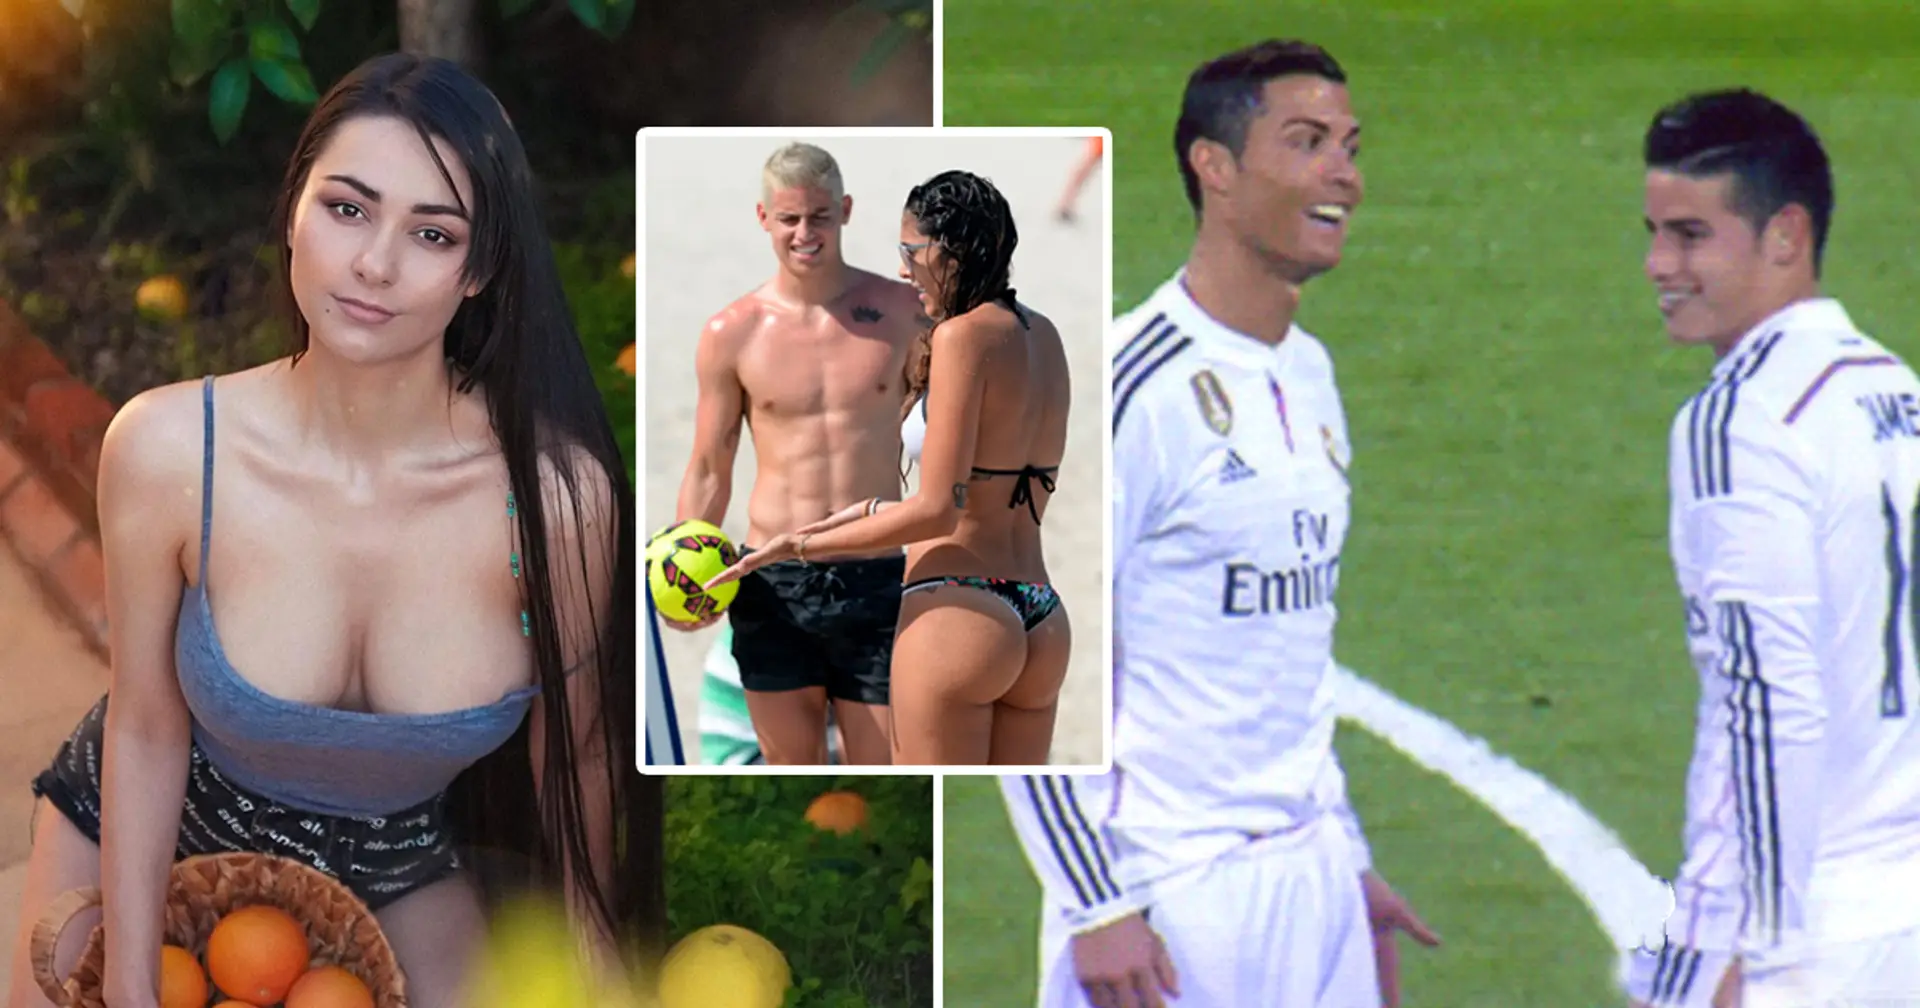 Cristiano Ronaldo once introduced James Rodriguez to stunning Russian model Helga Lovekaty, he was married back then